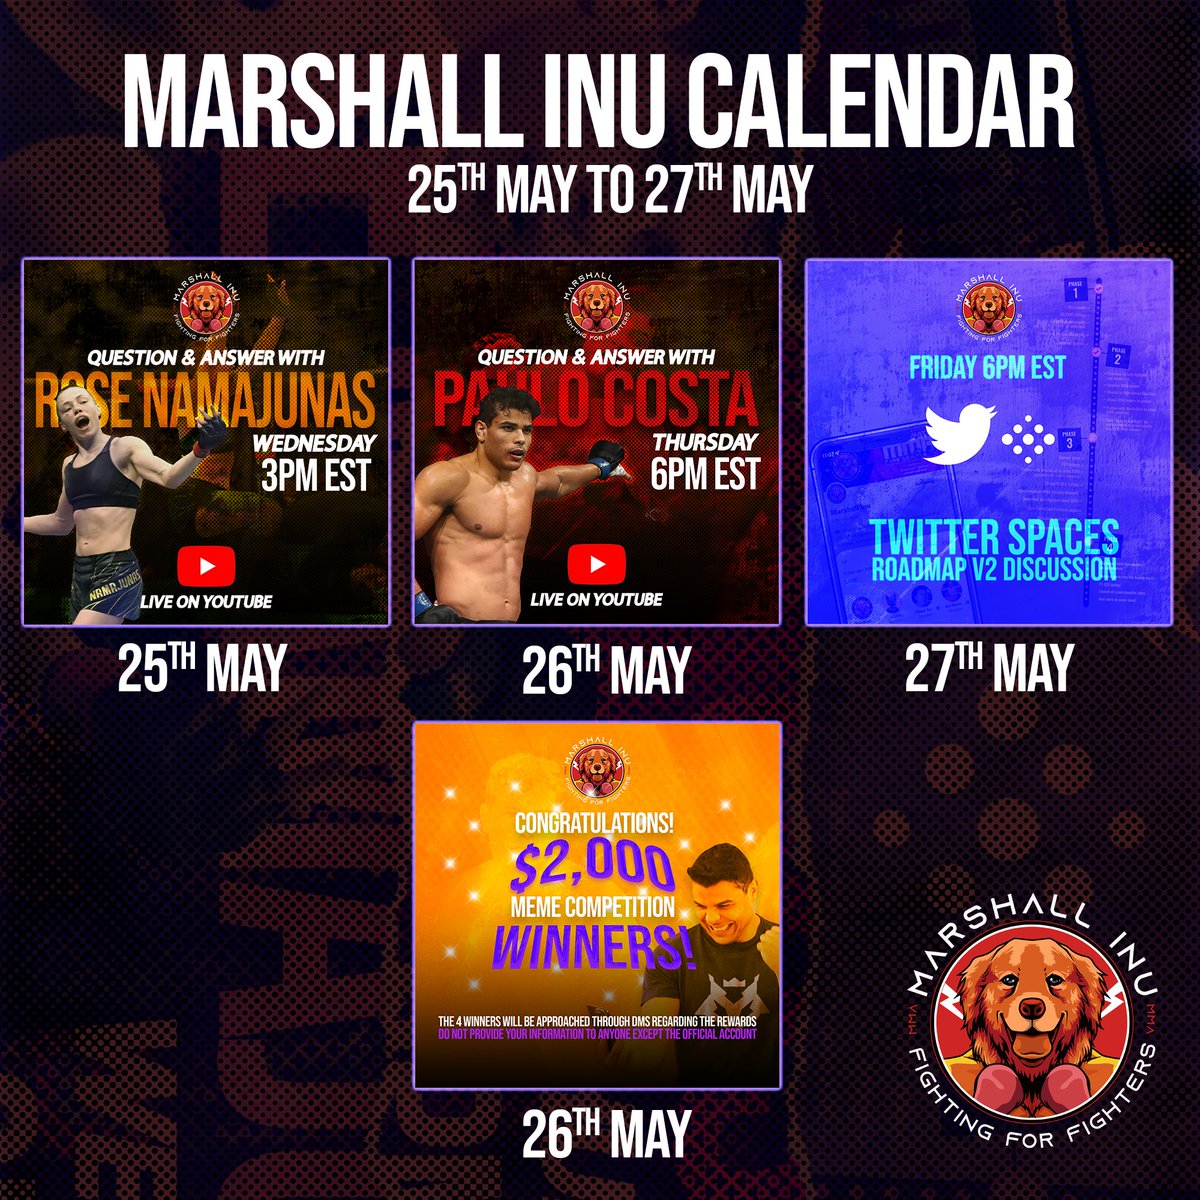 Marshalls, we have a big week ahead. We continue working away despite market conditions. Check our calendar for this week🥊🐶 Today 3pm EST - @rosenamajunas YouTube Q&A Thursday 6pm EST - @BorrachinhaMMA YouTube Q&A & $2k meme comp Friday 6pm EST - Team V2 Roadmap Twitter Spaces